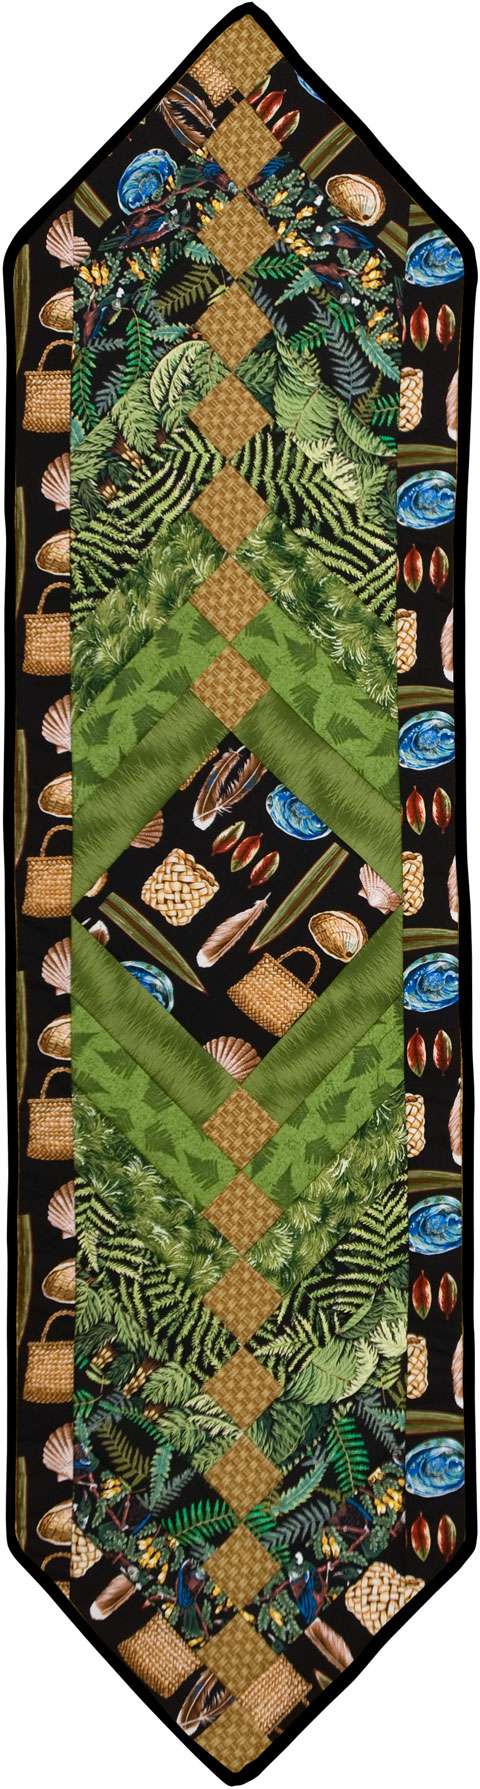 Kiwiana Table Runner Kitset Incl French Braid Quilts Book